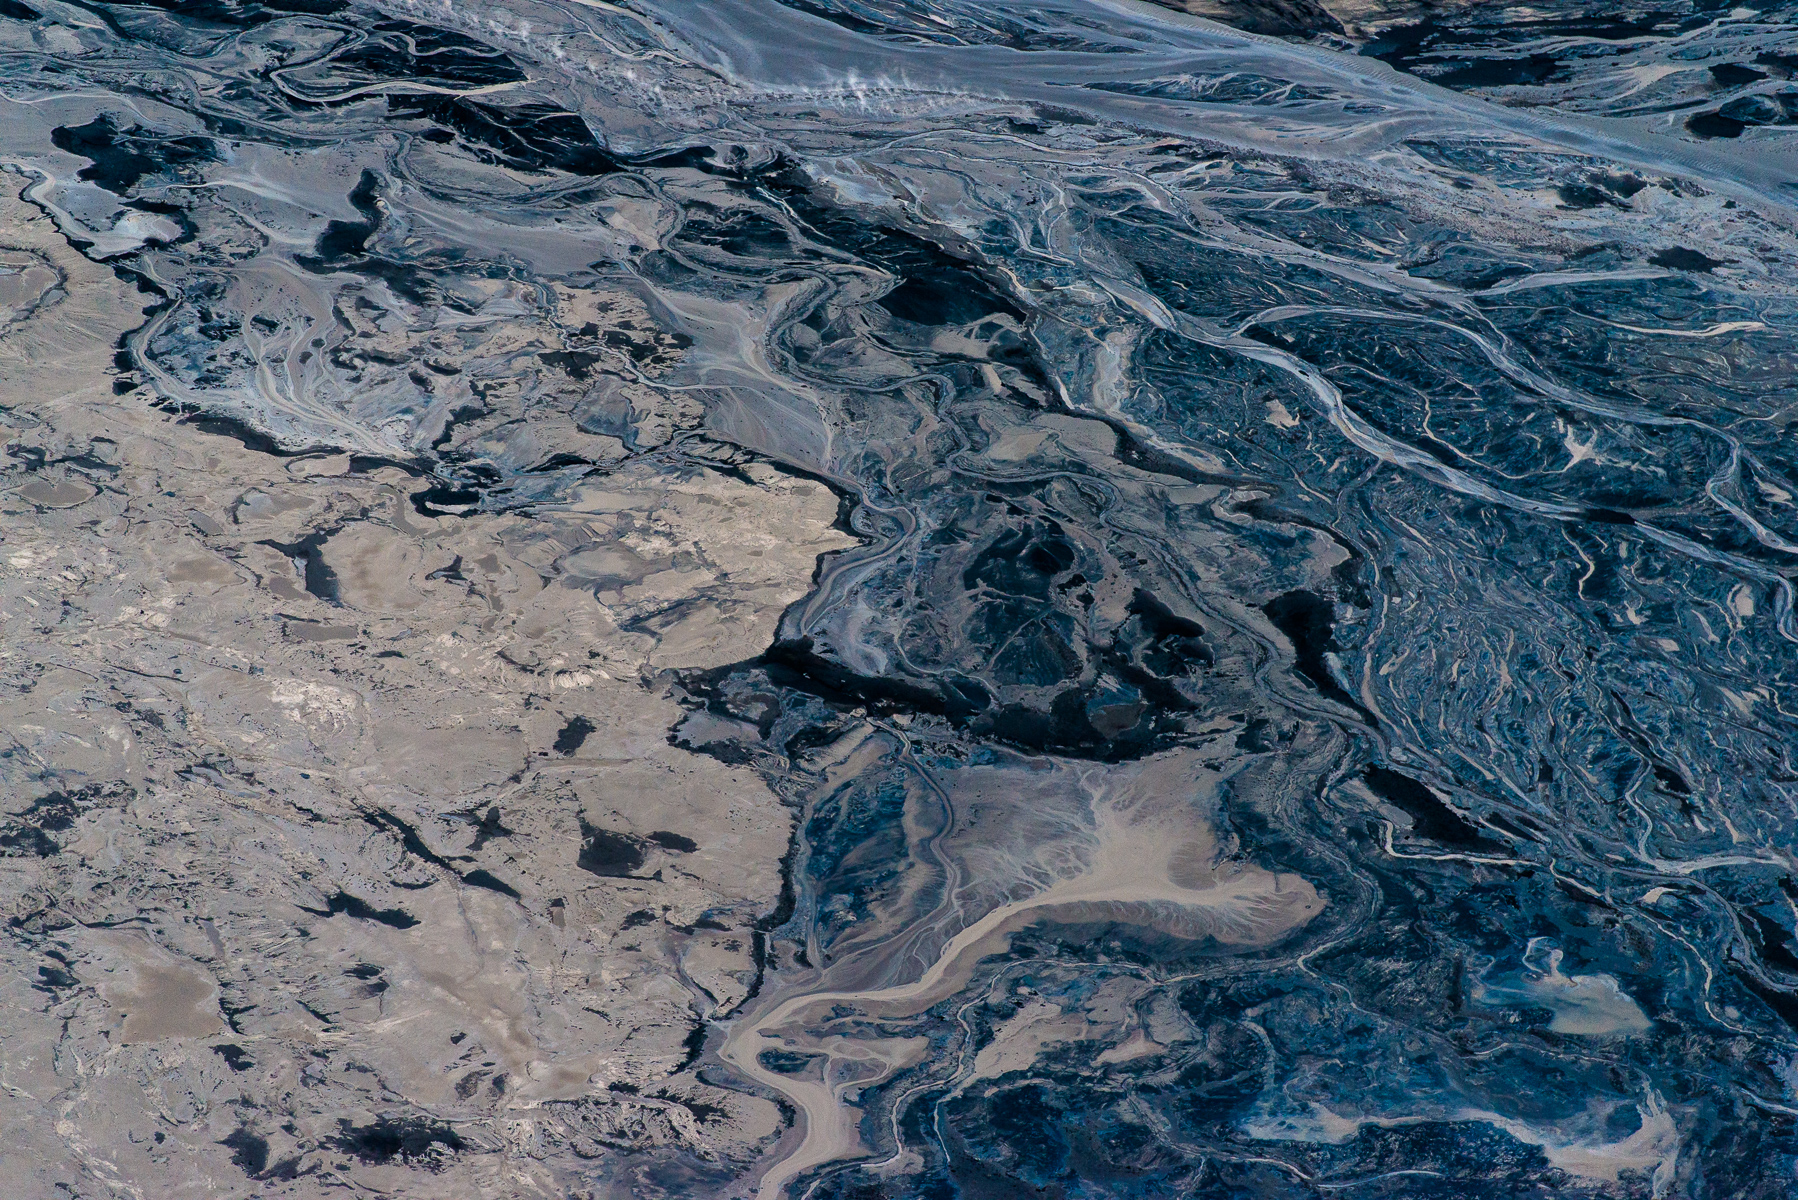 Tailings. Alberta Tar Sands, Oil Sands, Northern Alberta, Canada.Fine Art Print Price ListOpen and Larger Edition Prints. These are produced to the same high standards as our limited edition prints and offer collectors a more affordable way to get to know our work.Prints  are limited to an edition of 50 in each size above 20” X 24”. Prices are for prints only and do not include tax or shipping.All prices are in US dollars.			12”x18” 					$350.16”x24” 				       $650.20”x30” 					$1000.24”x36” 				       $1500. 30”x45” 					$2300.40”x60”				      $3600